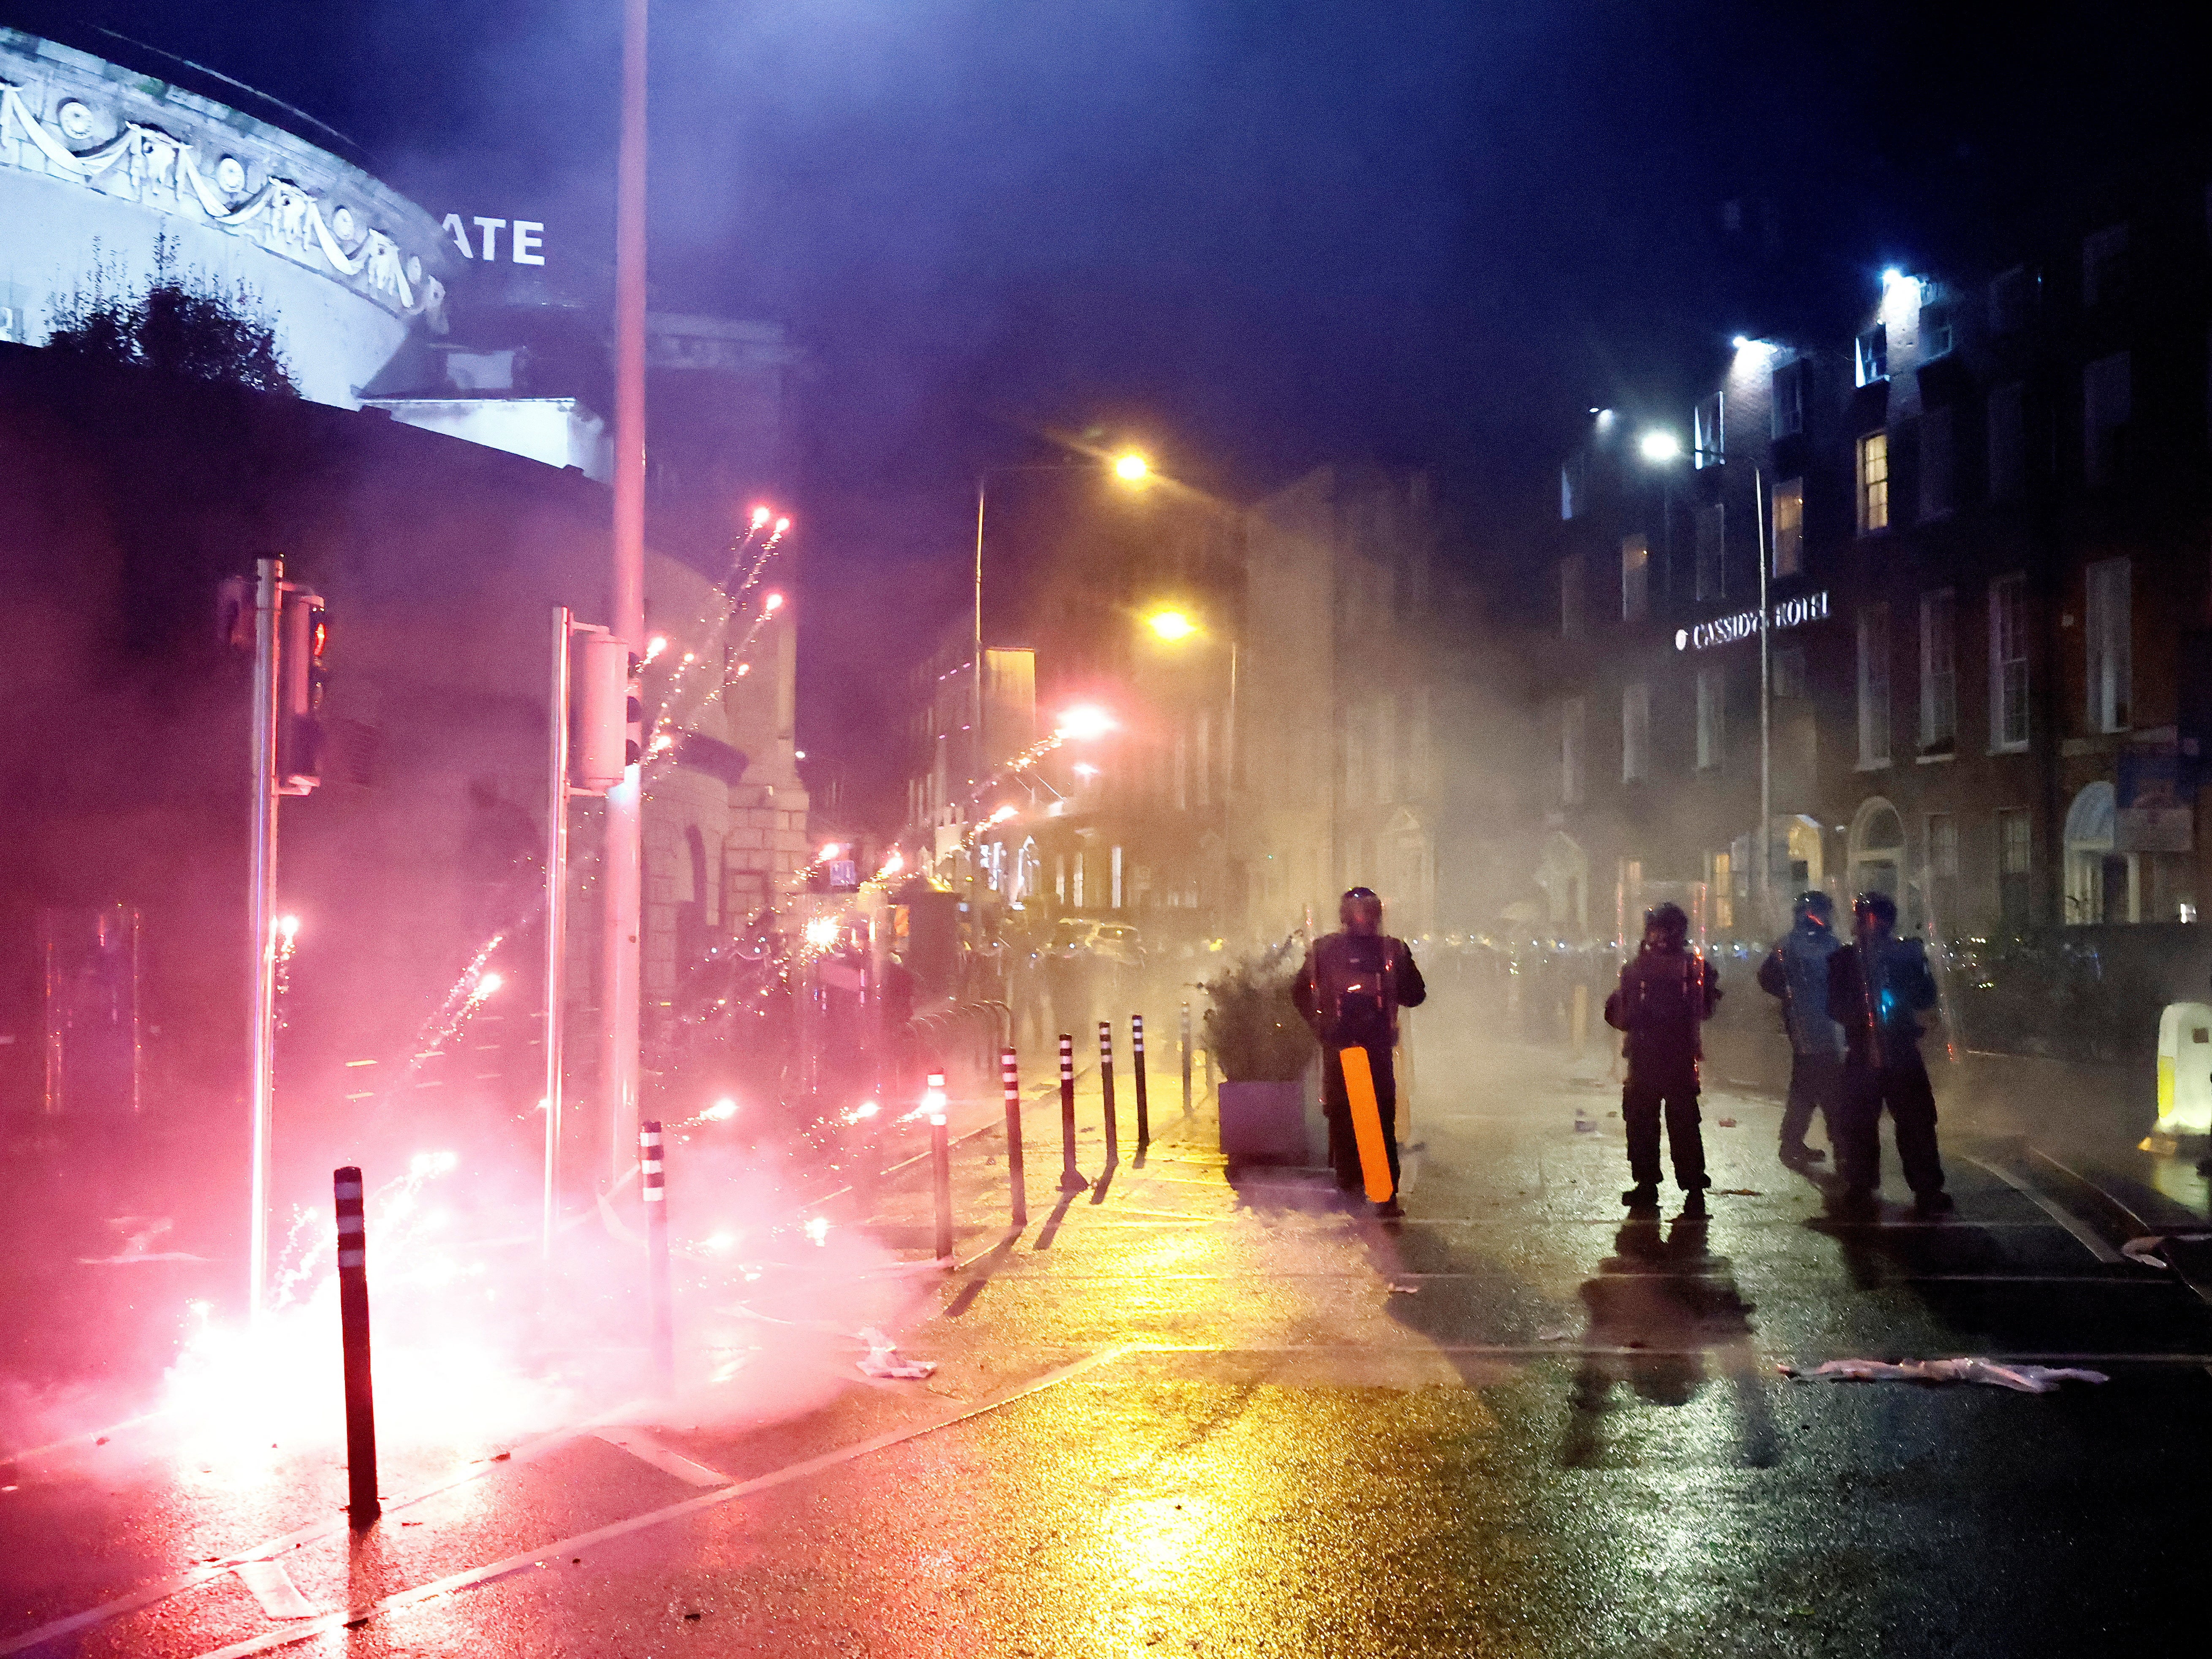 Fireworks were thrown at police officers on Thursday